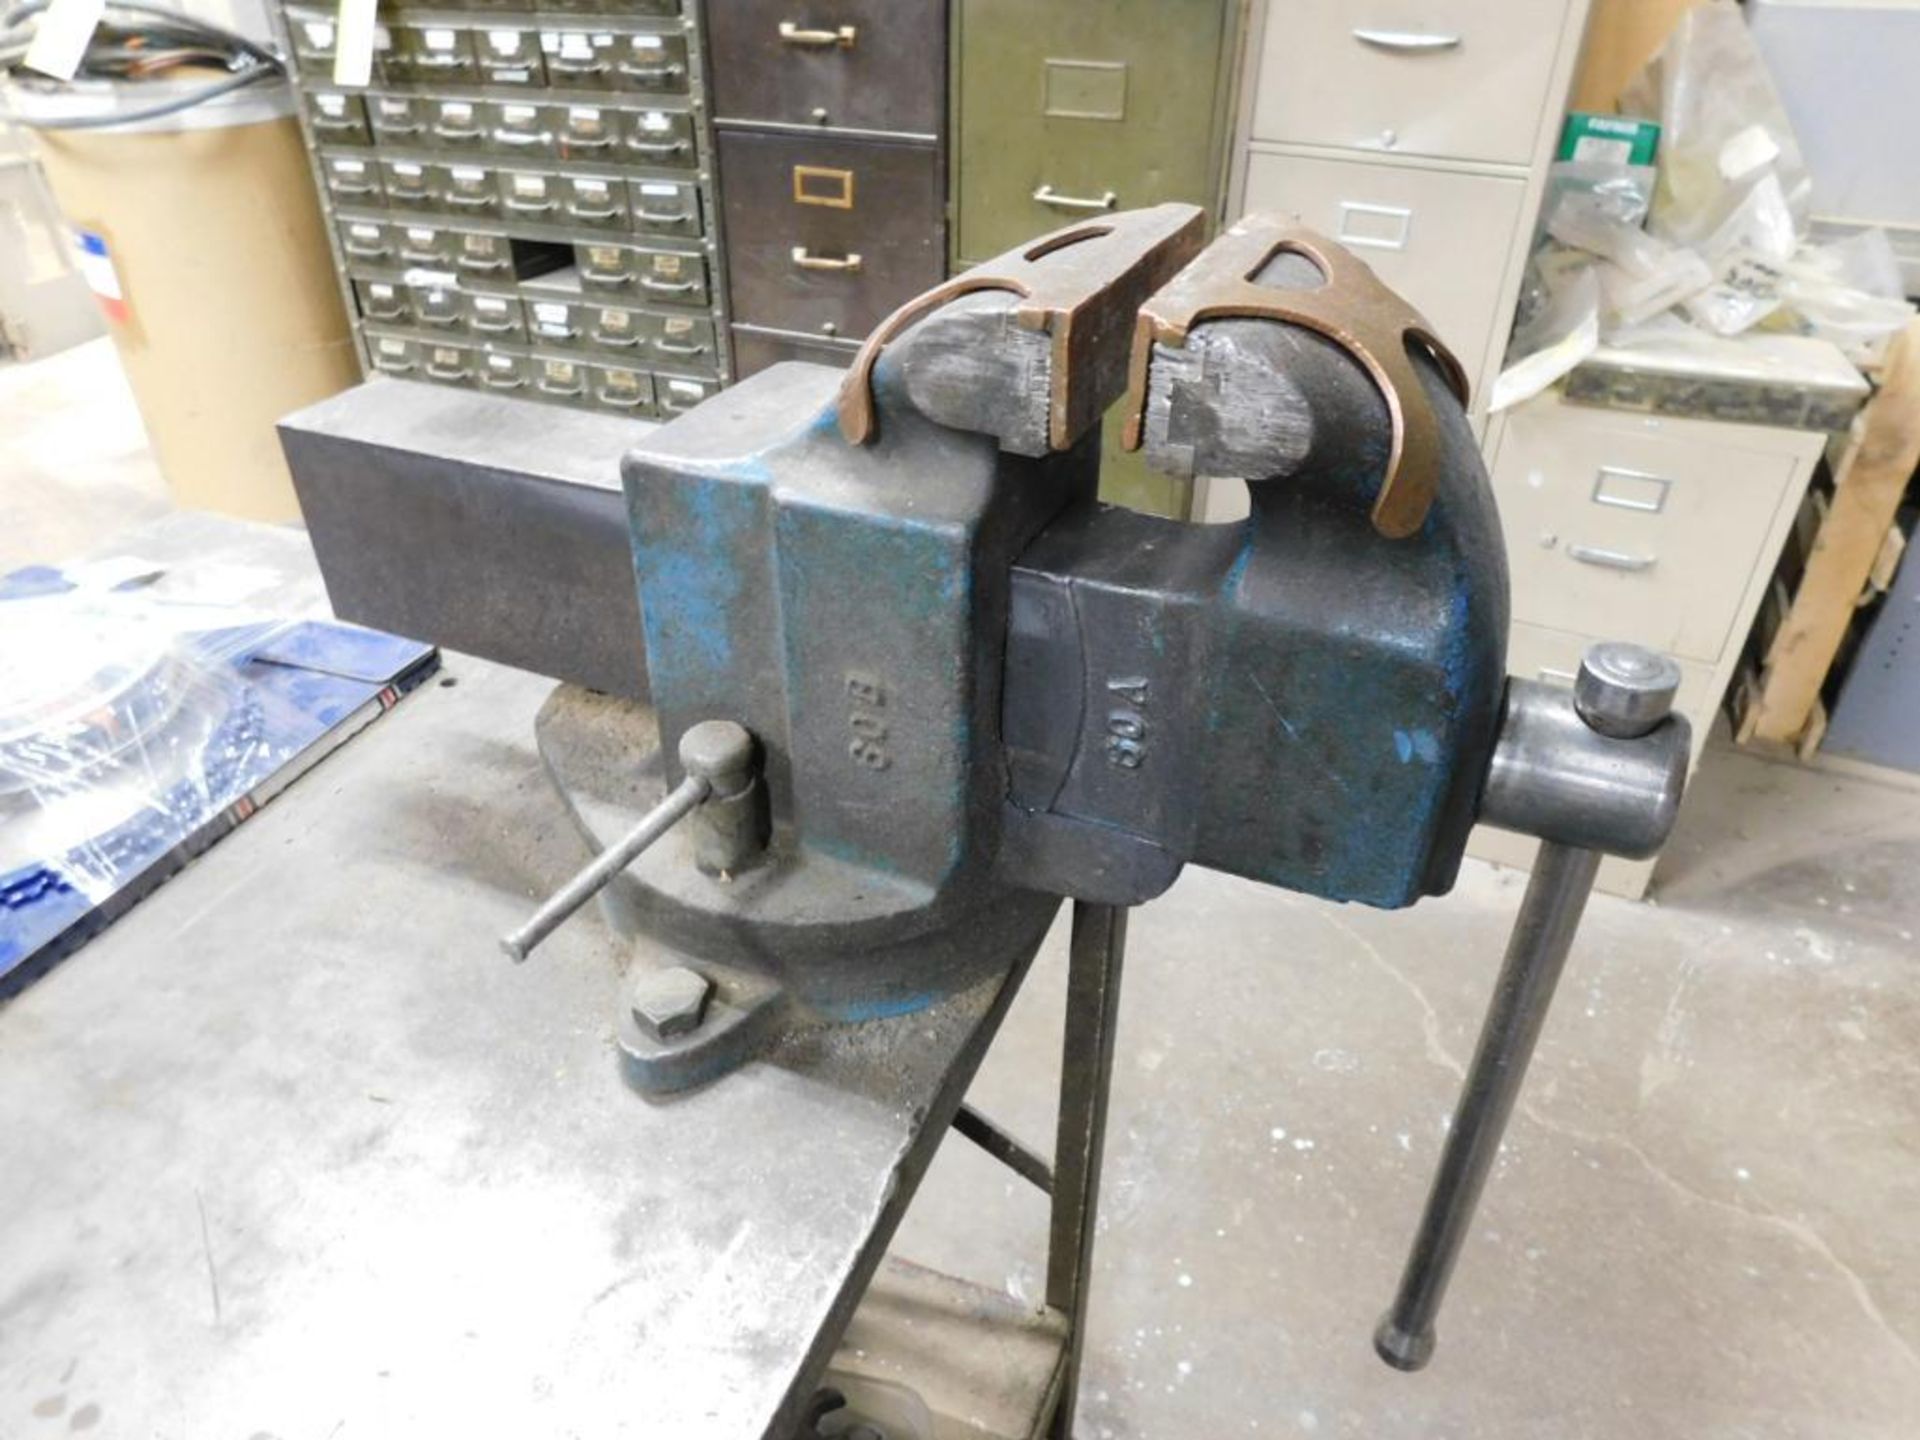 LOT: Fabrication Table w/6" Jaw Morgan Vise, Small Arbor Press, Balancing Stand, Assorted Saw Blades - Image 5 of 10